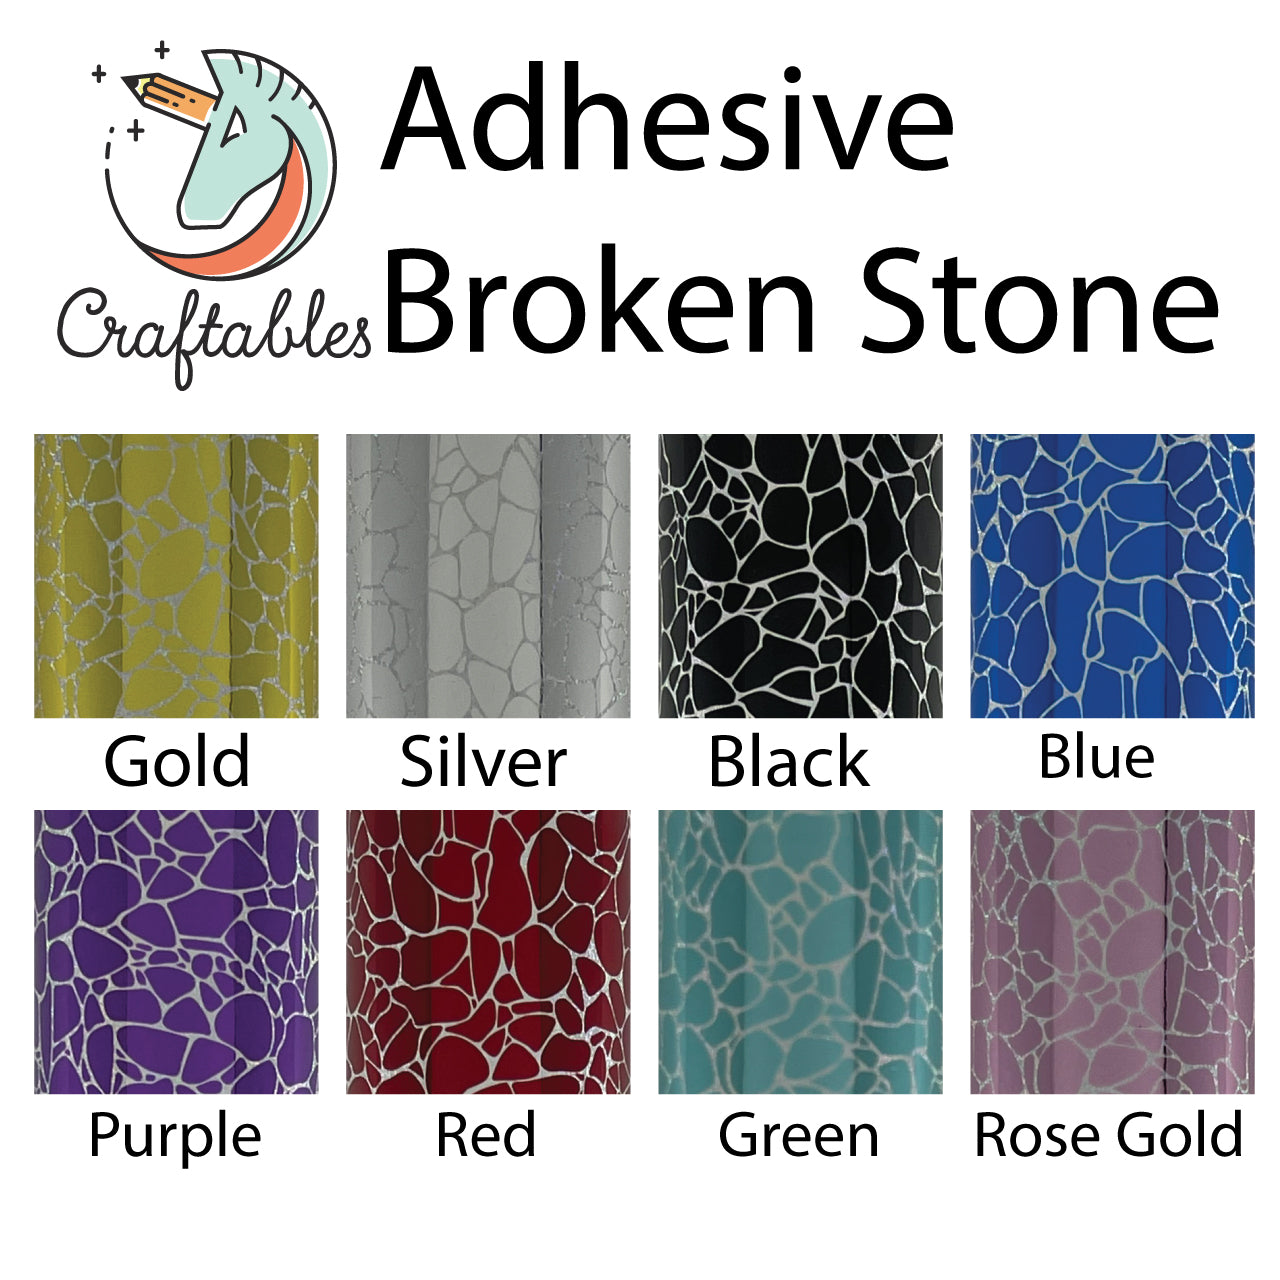 Black Broken Stone Holographic Adhesive Vinyl Sheets By Craftables